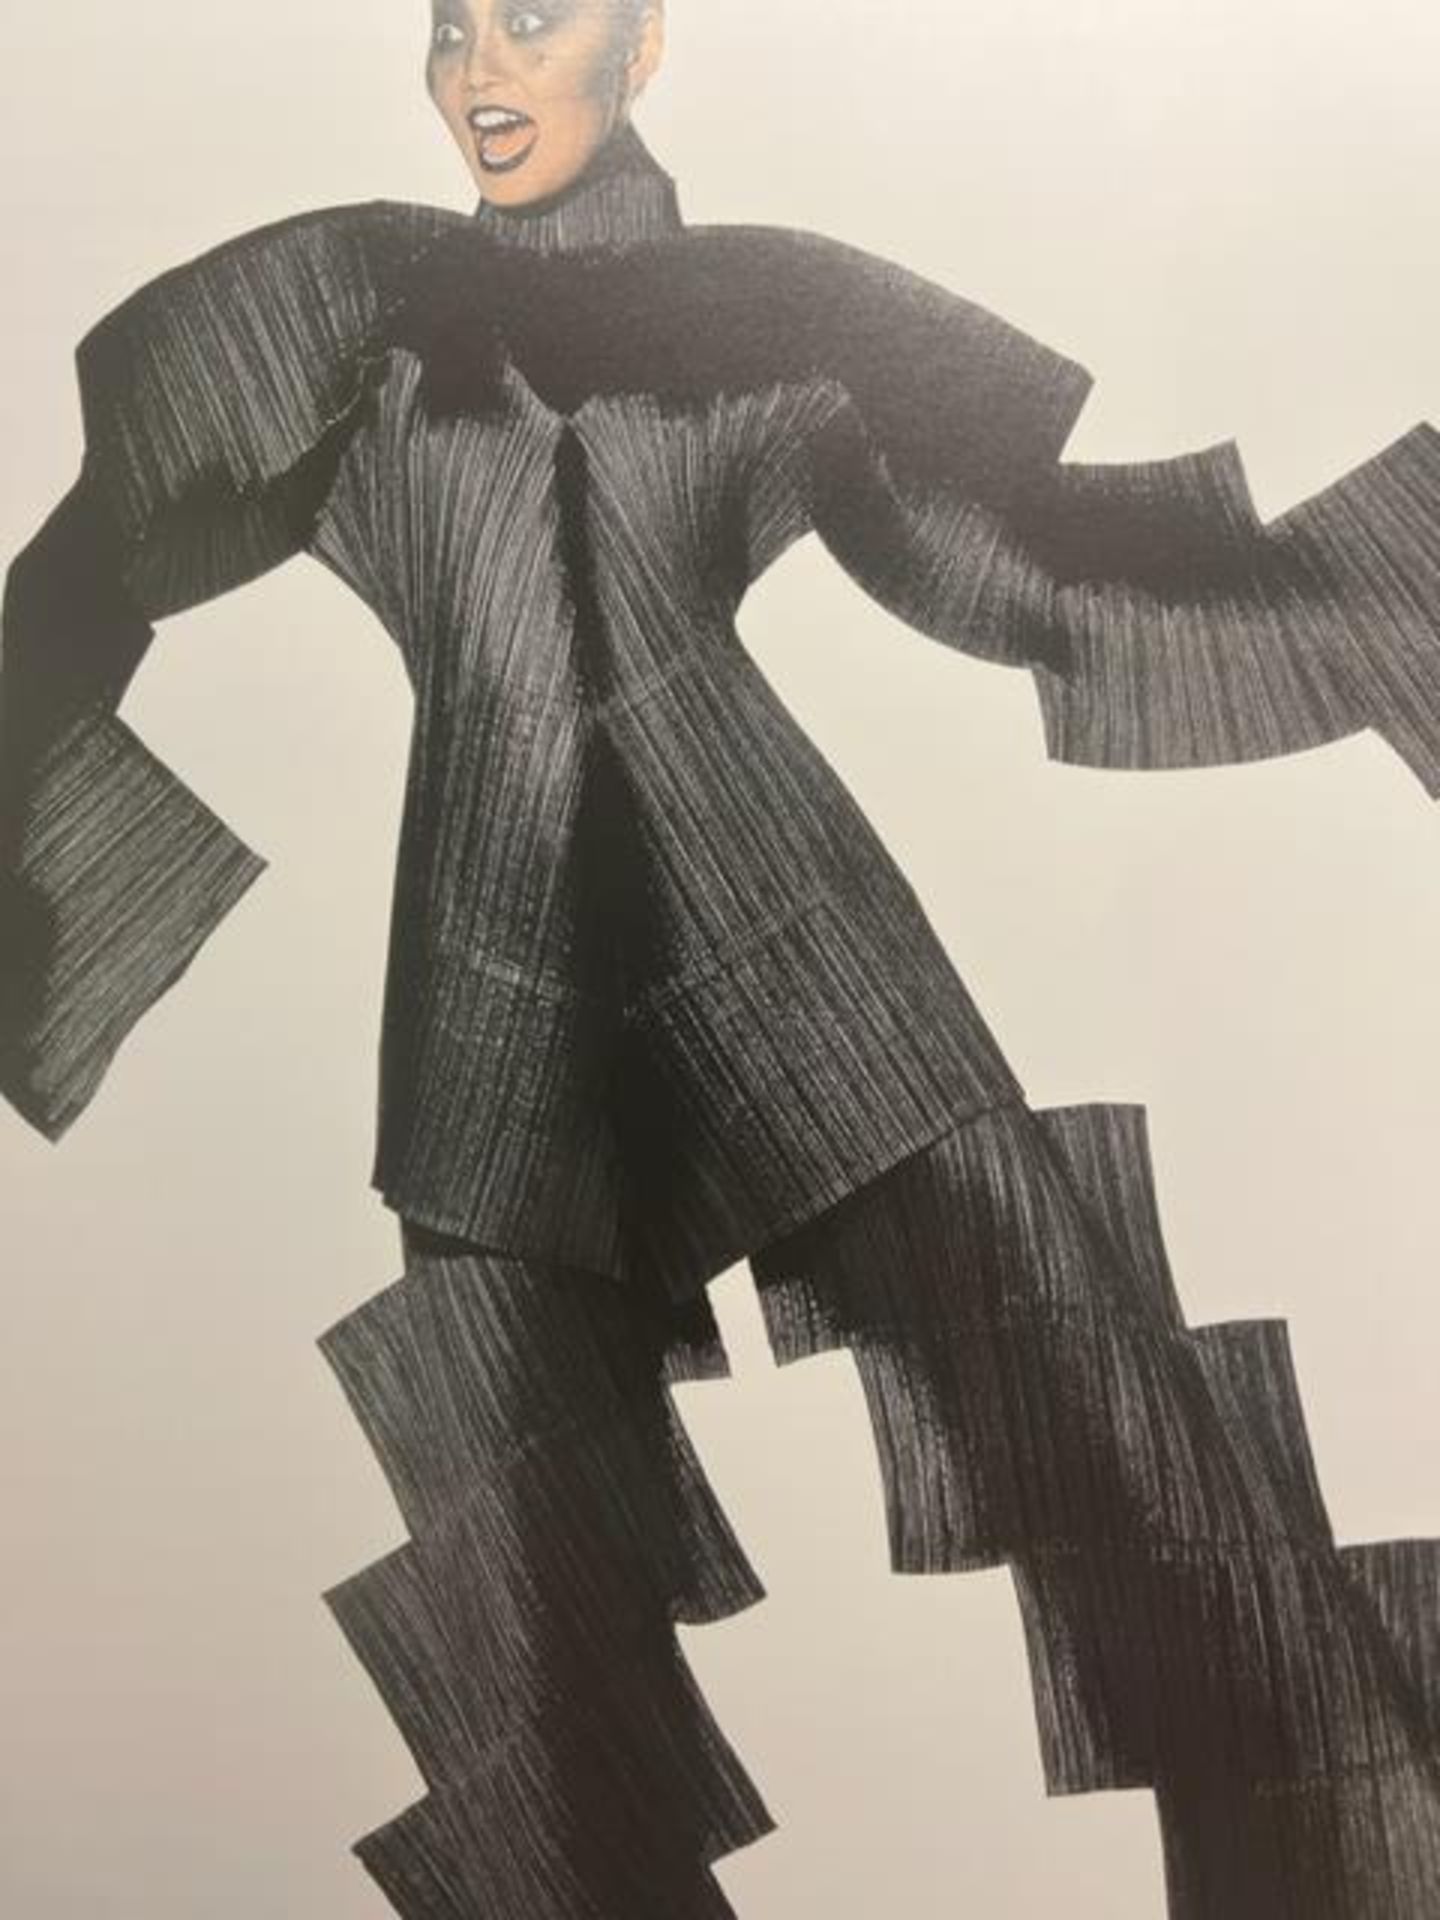 Irving Penn "Staircase Pleats" Print. - Image 4 of 6